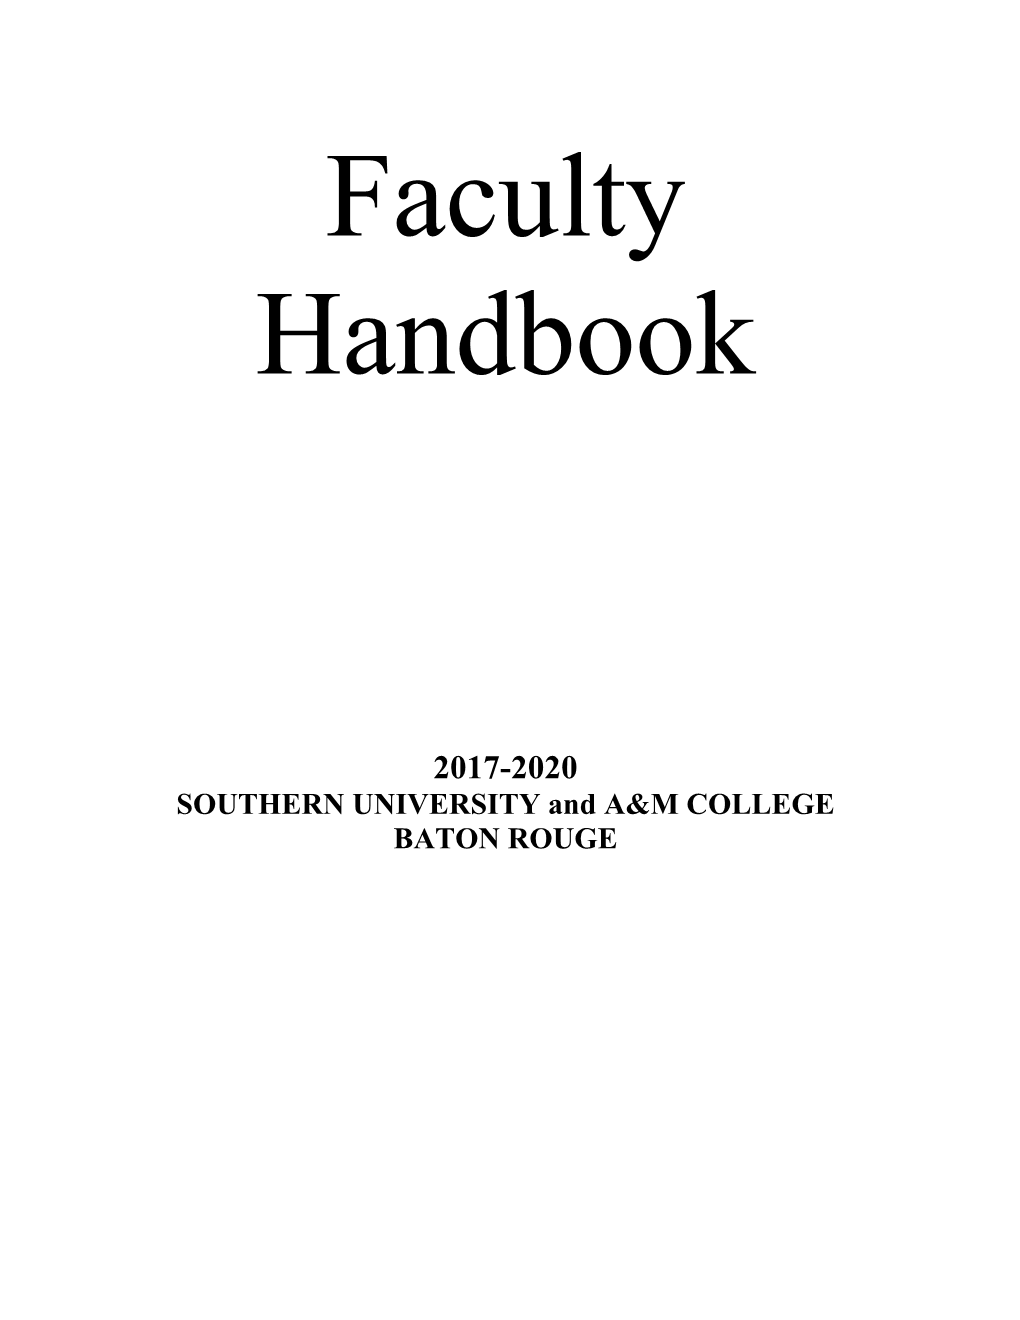 Southern University and A&M College Baton Rouge Faculty Handbook